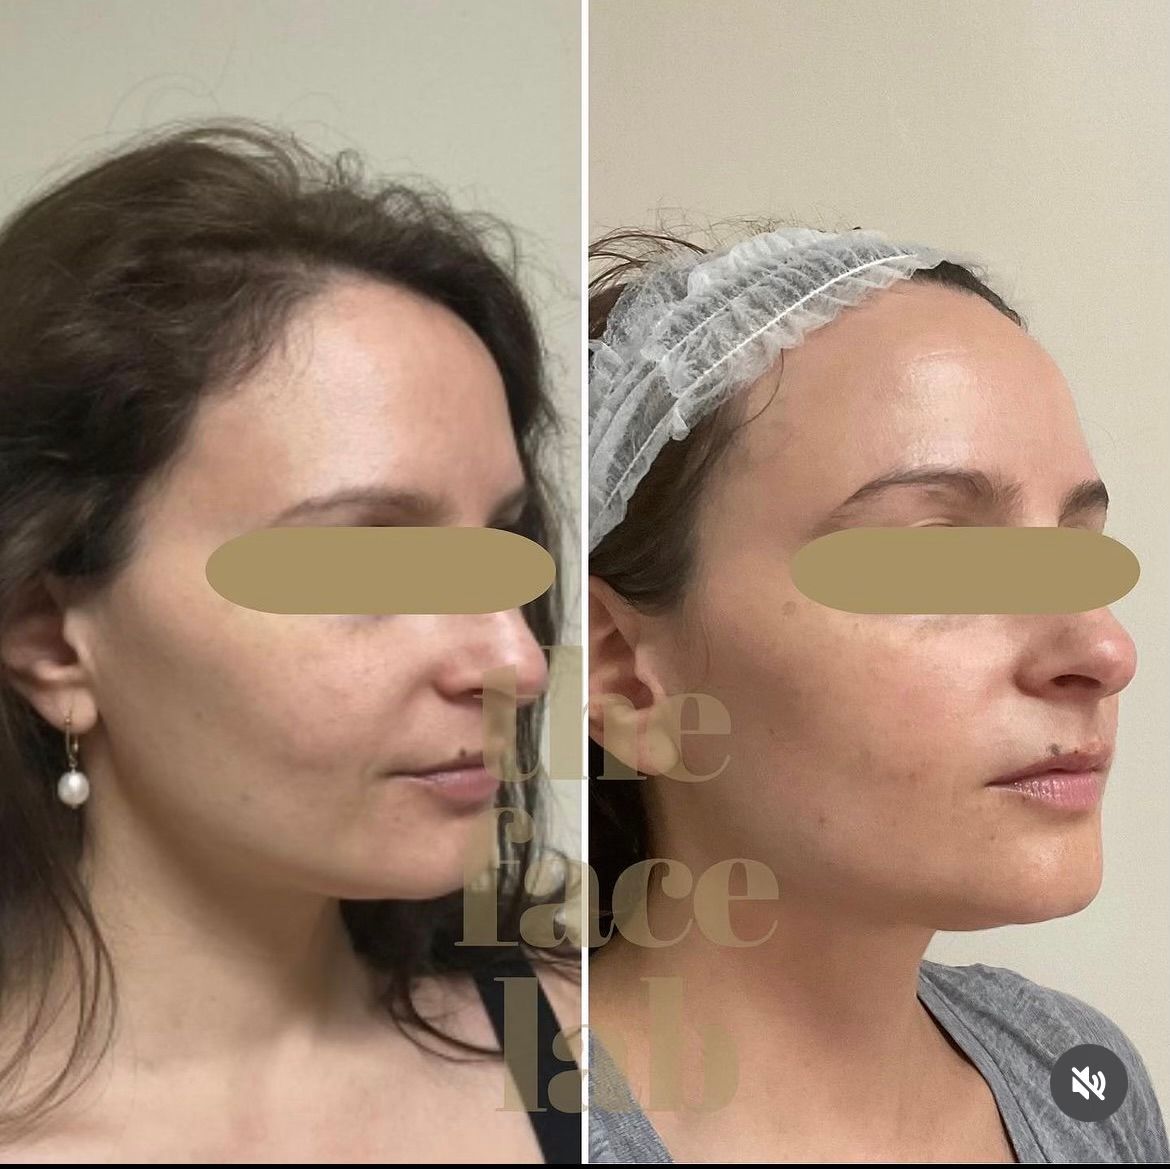 a before and after photo of a woman 's face with the words face lab behind her